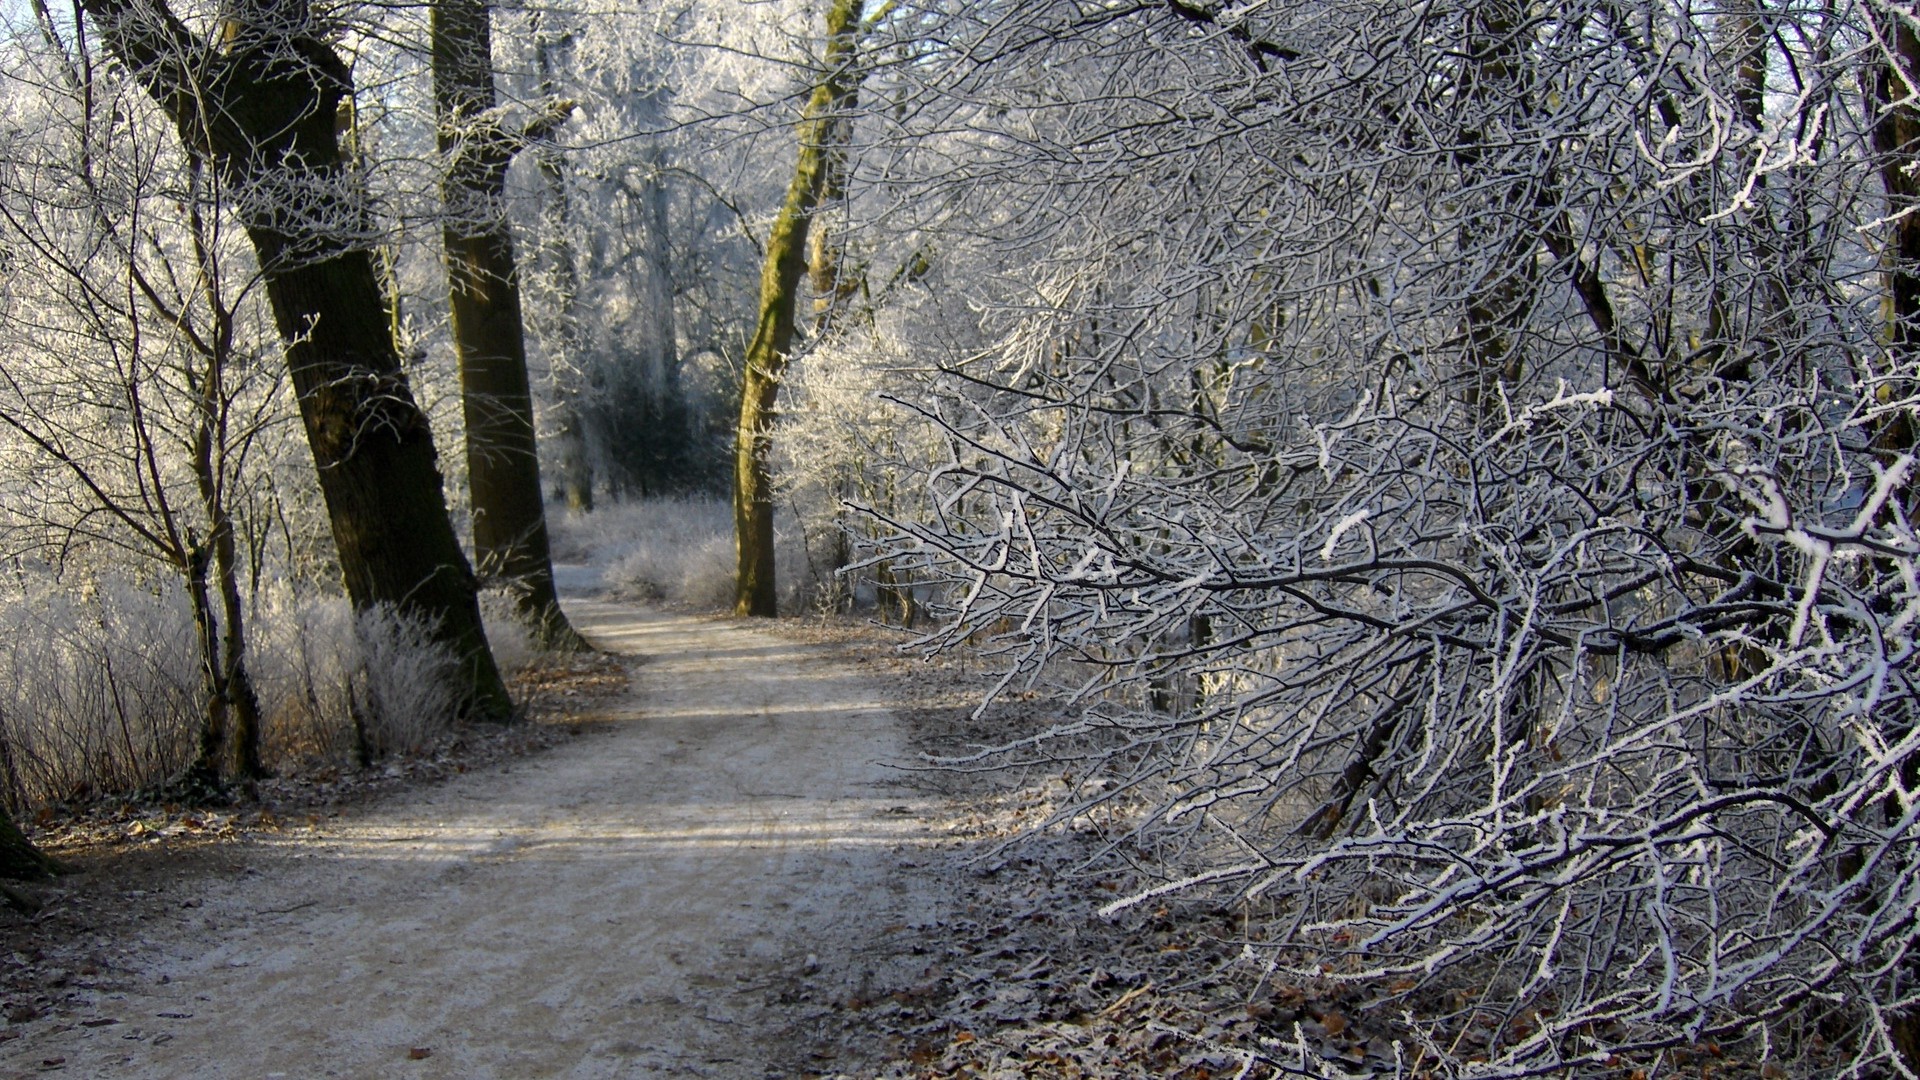 1920x1080 wallpapers: the netherlands, groningen, road, trees, hoarfrost, winter, forest (image)